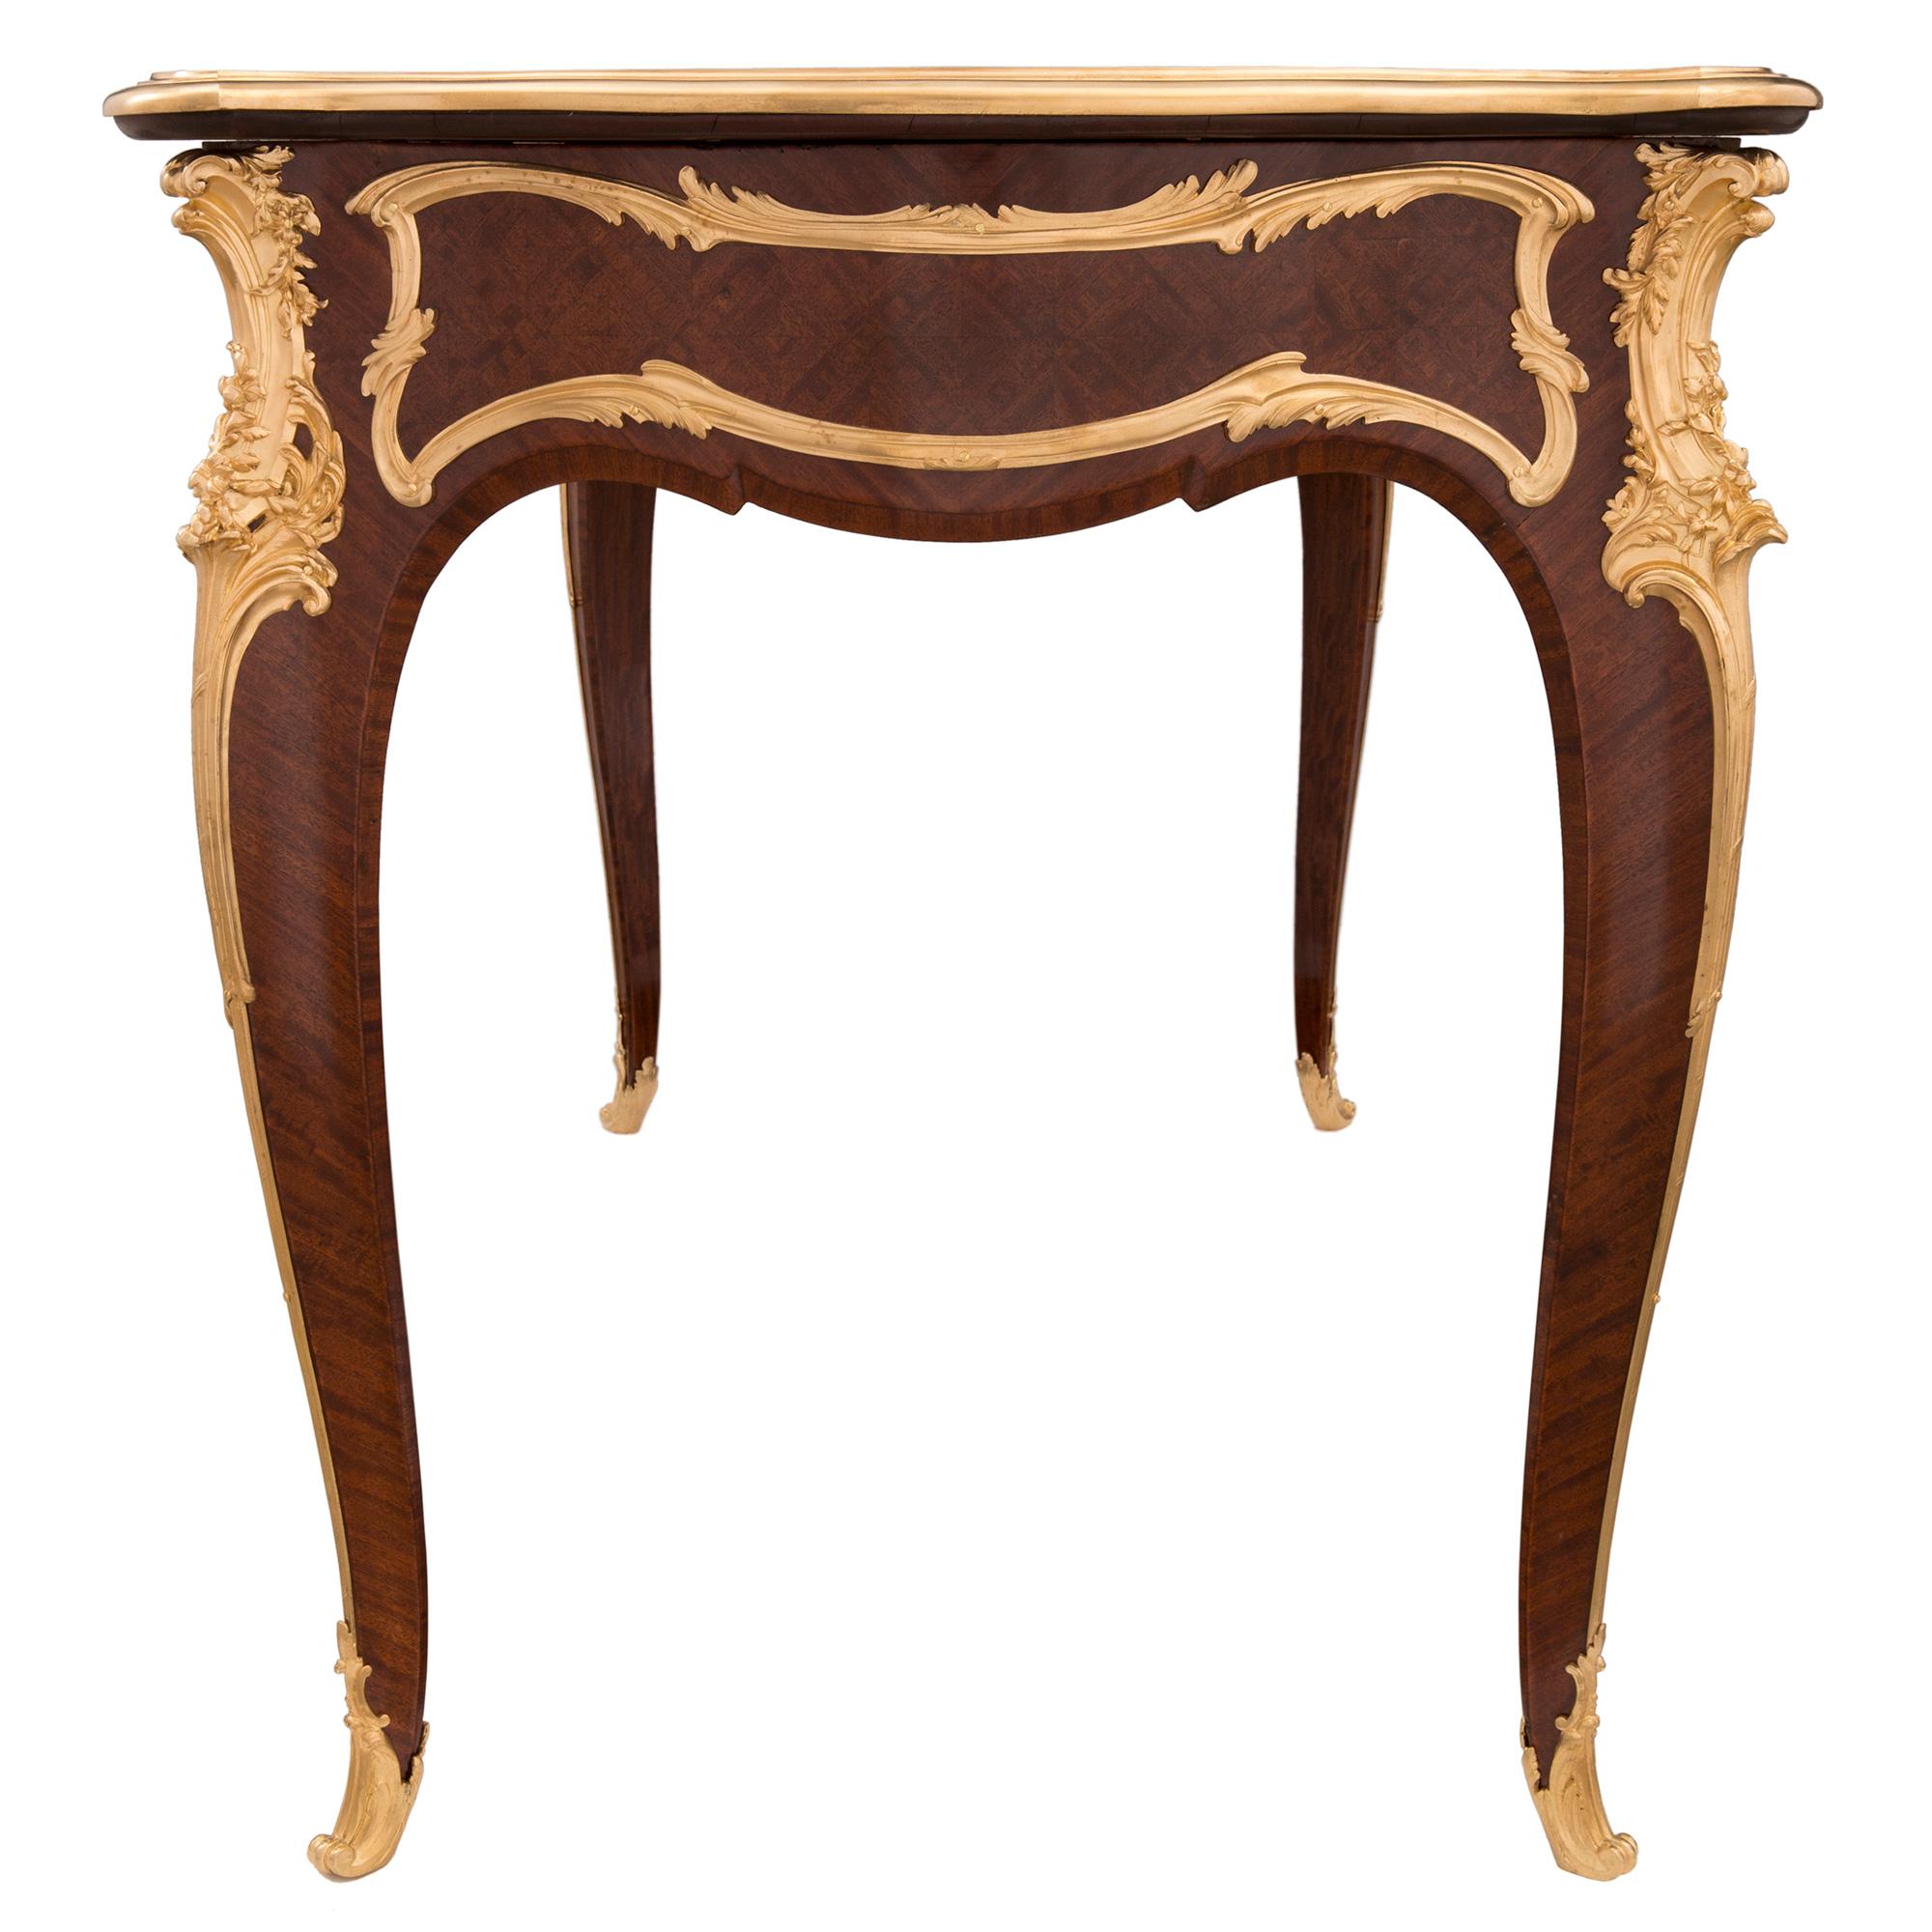 French 19th Century Louis XV St. Kingwood and Ormolu Desk, Attributed to Linke For Sale 2